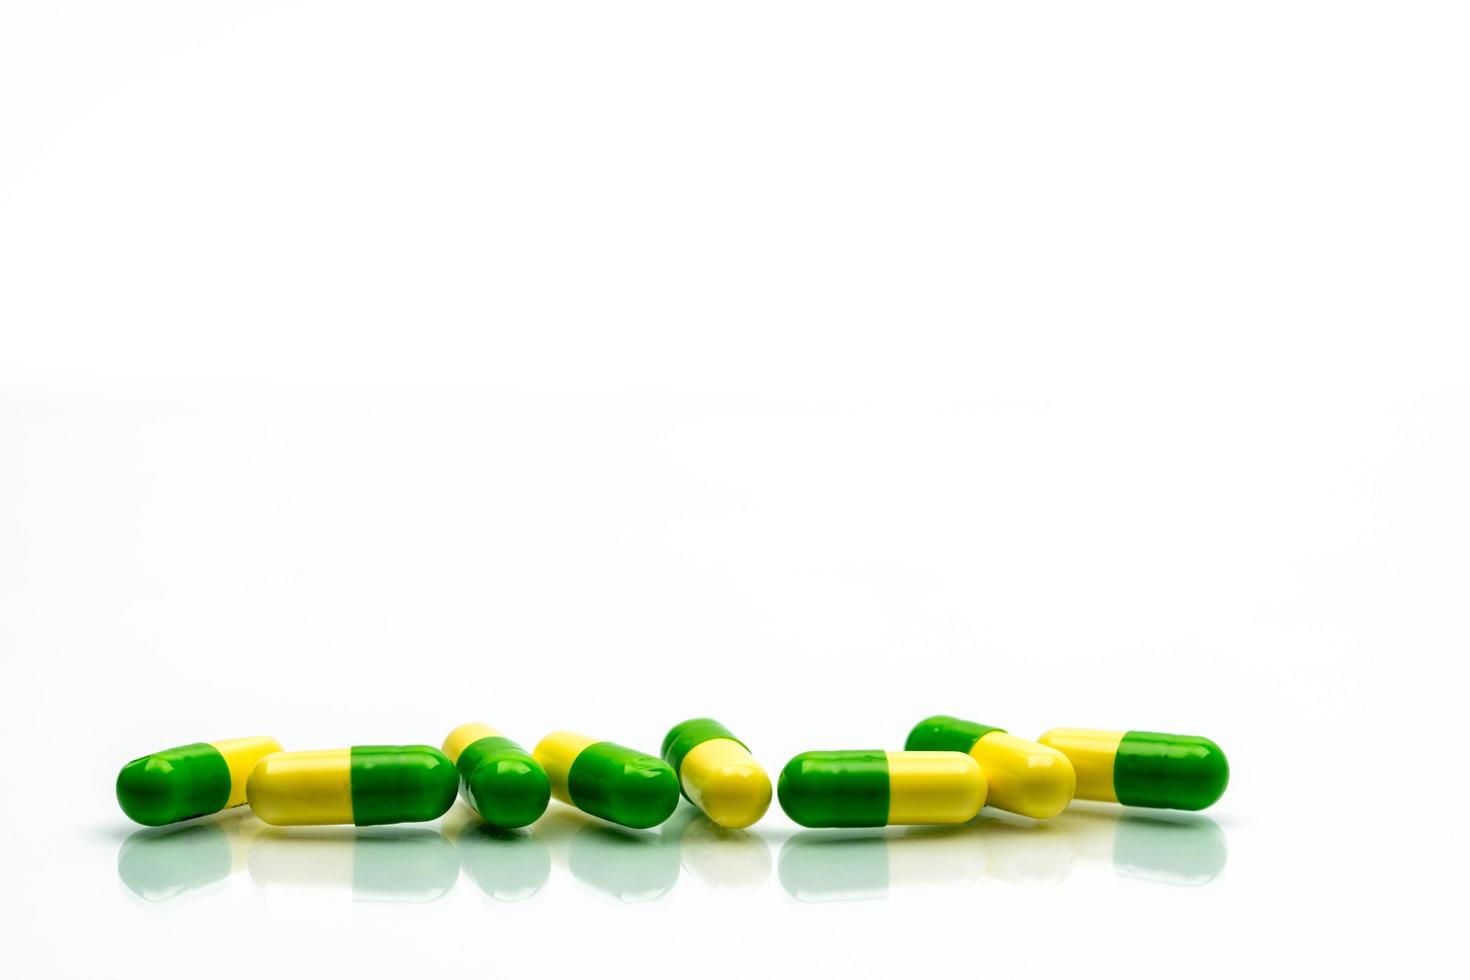 Green, yellow tramadol capsule pills on white background with shadows and copy space. Cancer pain management. Opioid analgesics. Drug abuse in teenage in Thailand. photo